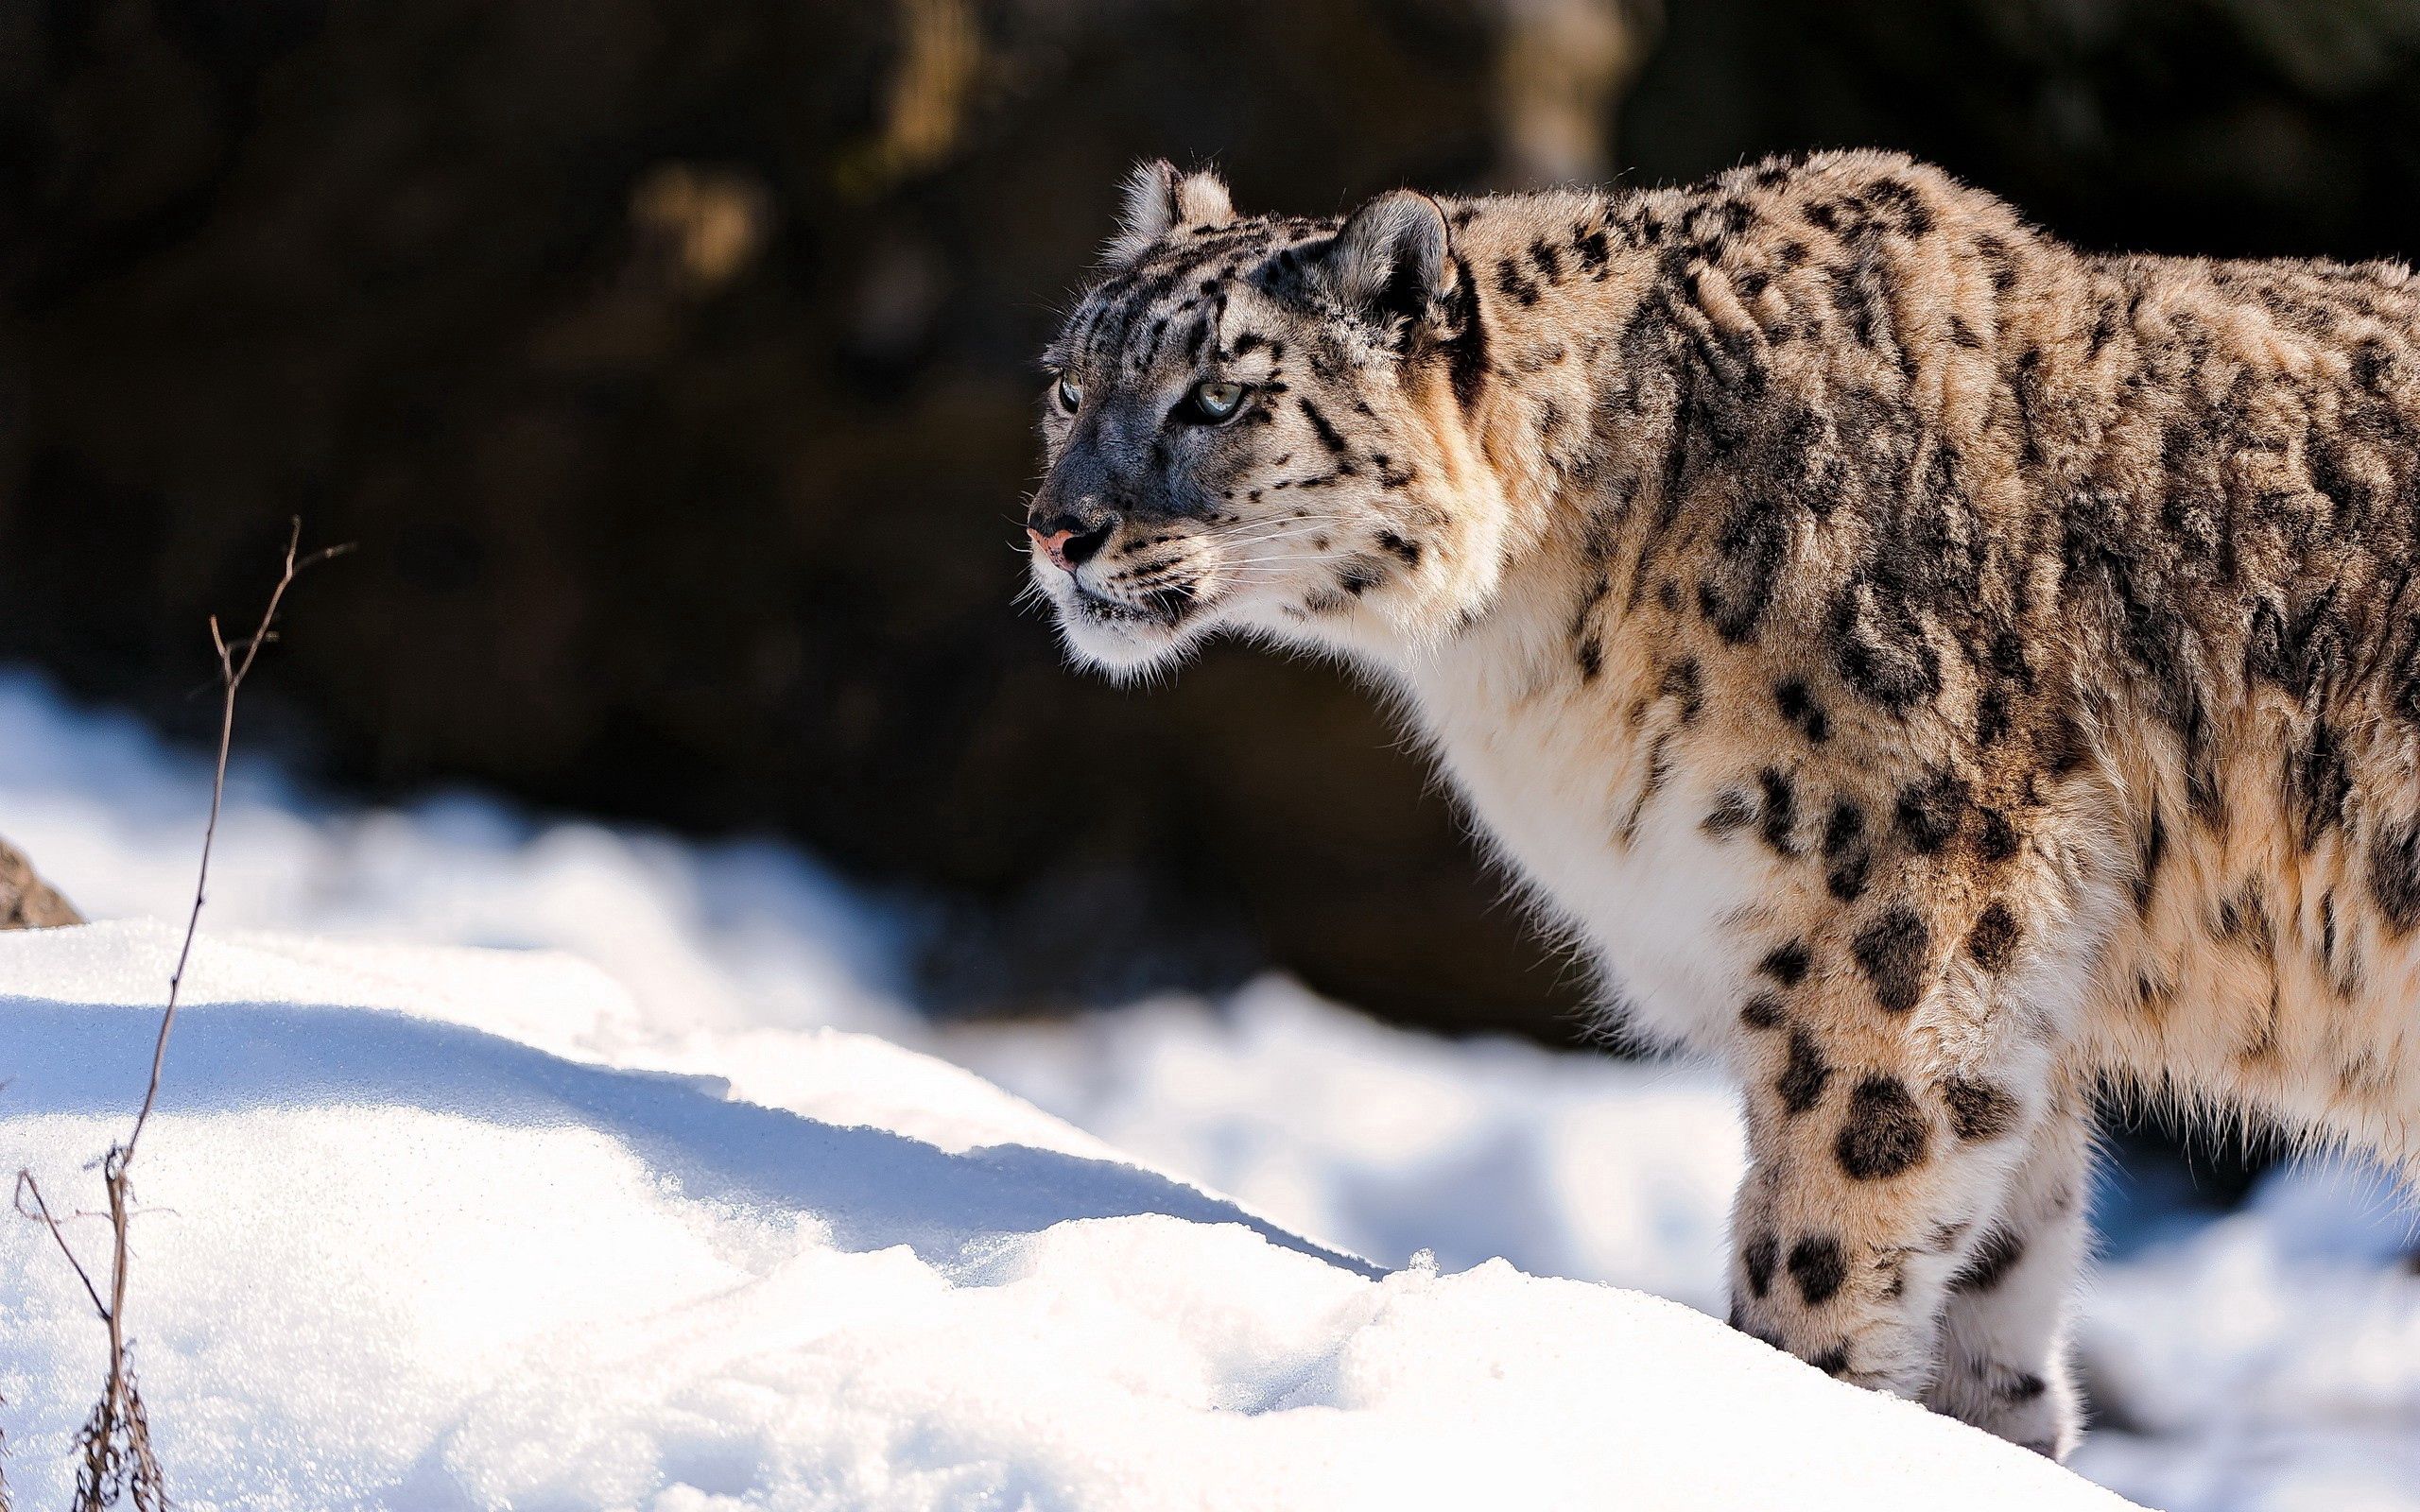 A 4K ultra HD mobile wallpaper depicting a graceful and elusive Snow  Leopard, with its thick fur and piercing blue eyes, perched on a rocky  ledge against the backdrop of a snow-capped